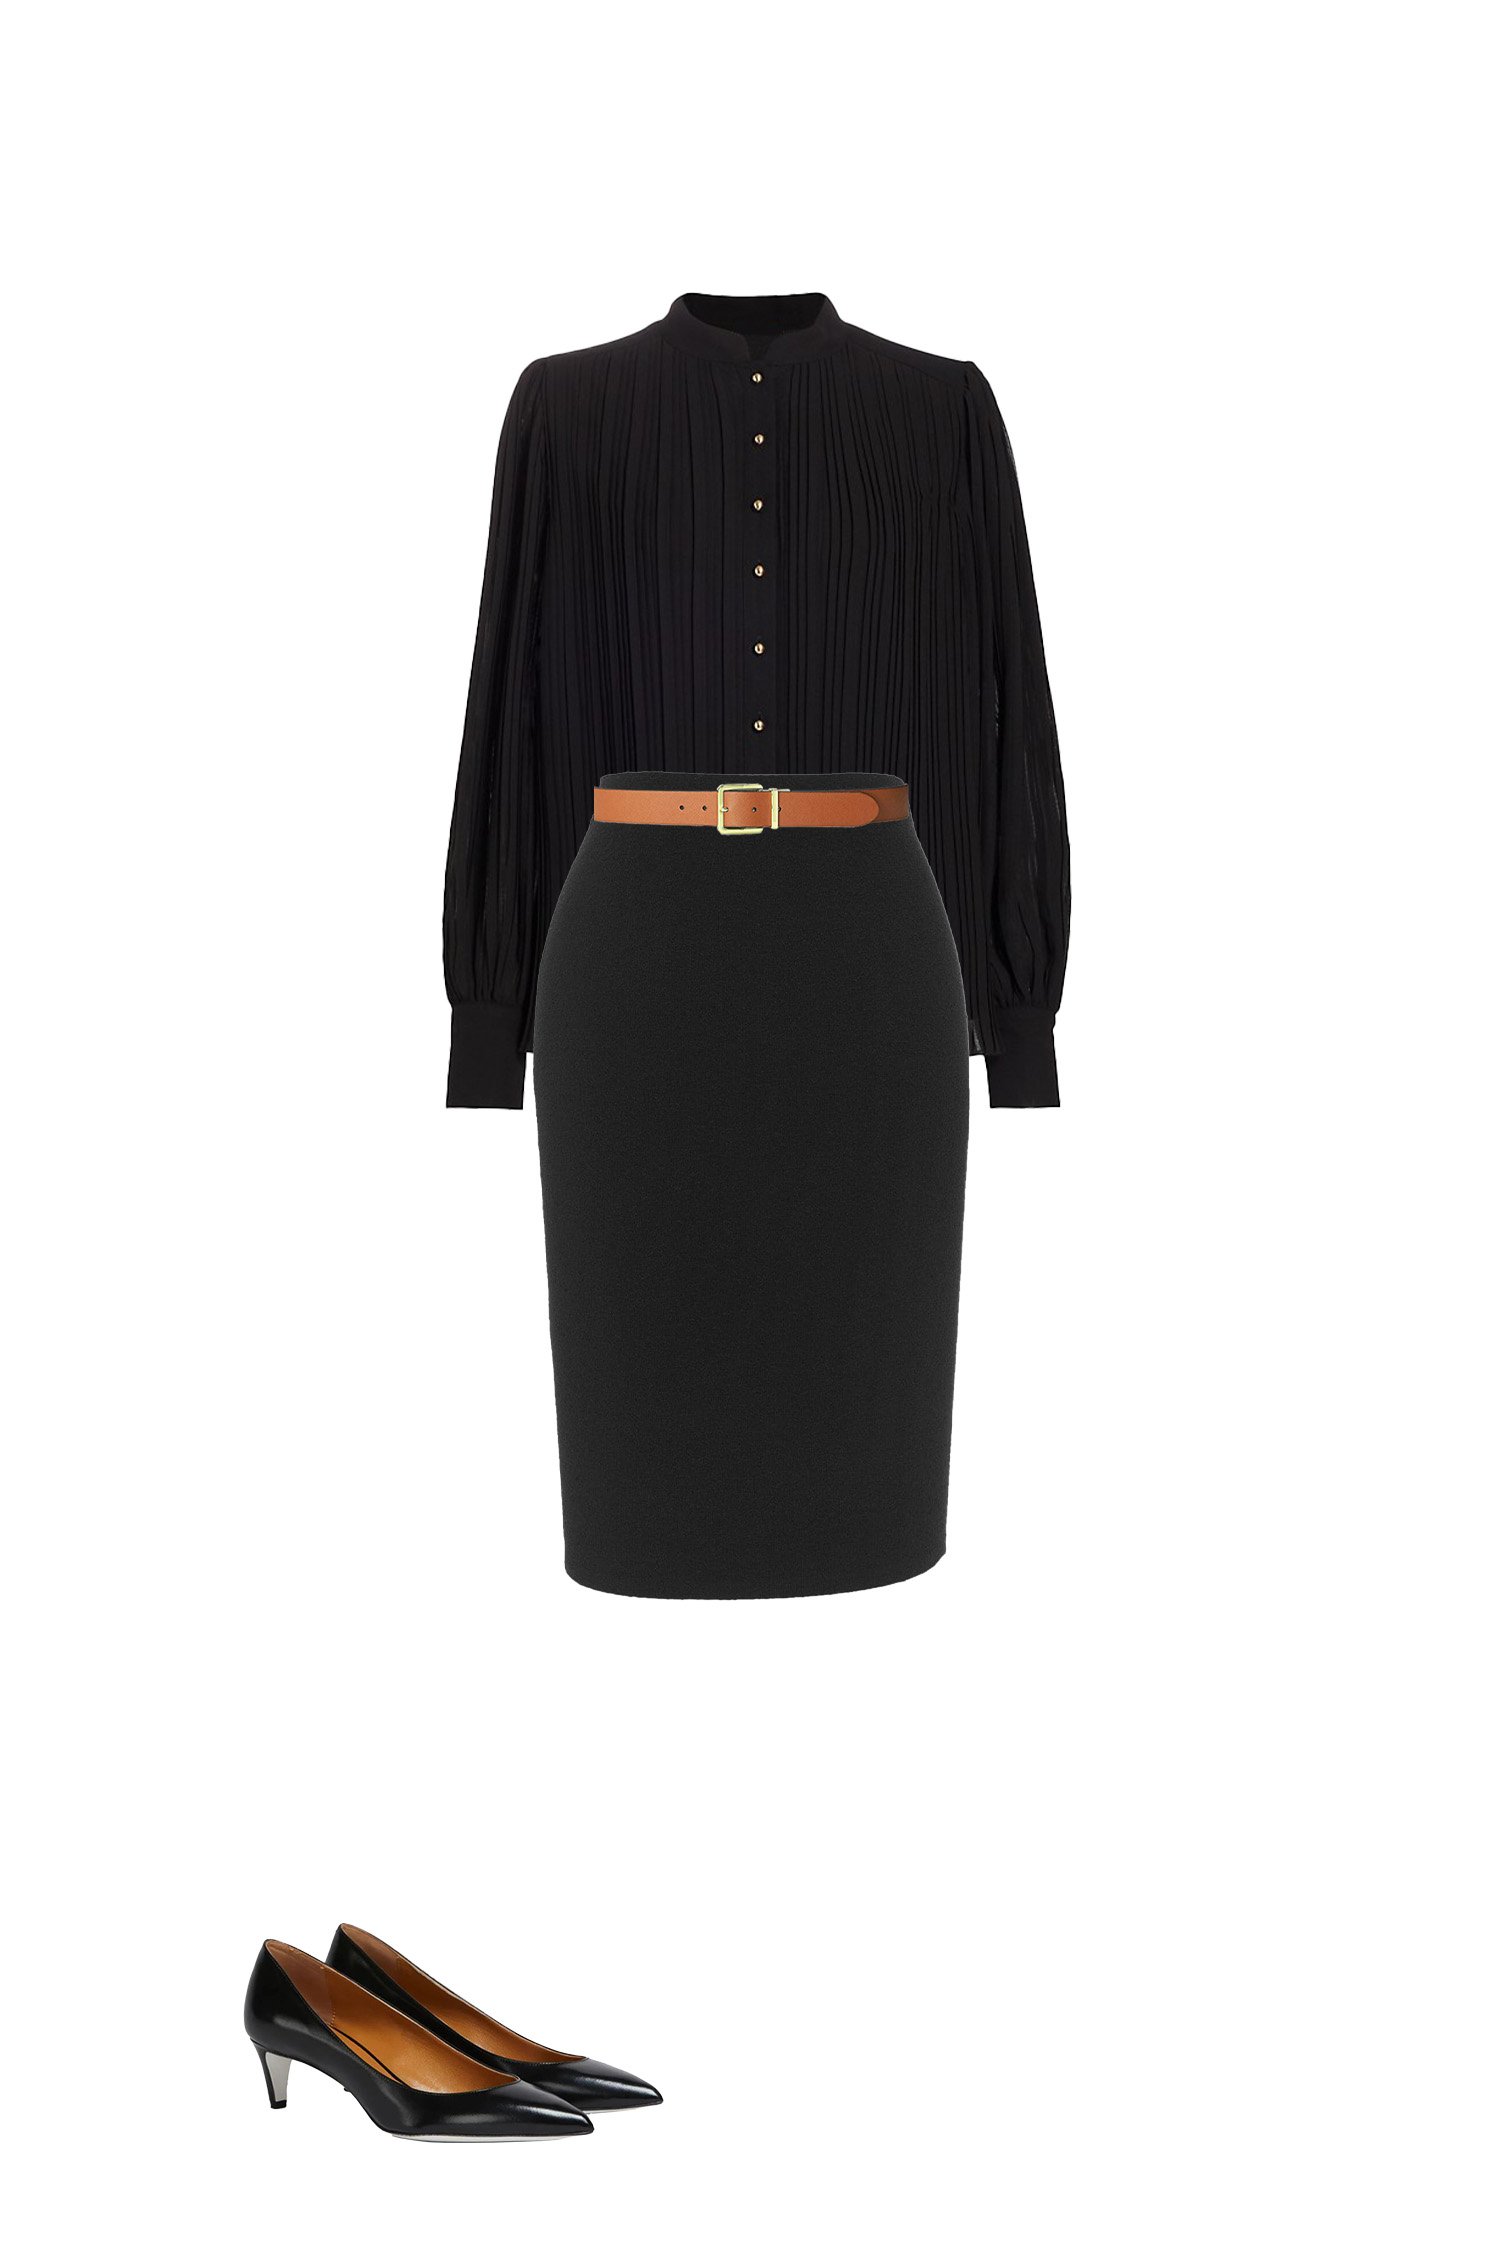 Black Pencil Skirt Outfit with Black Pleated Shirt, Brown Belt and Black Pumps